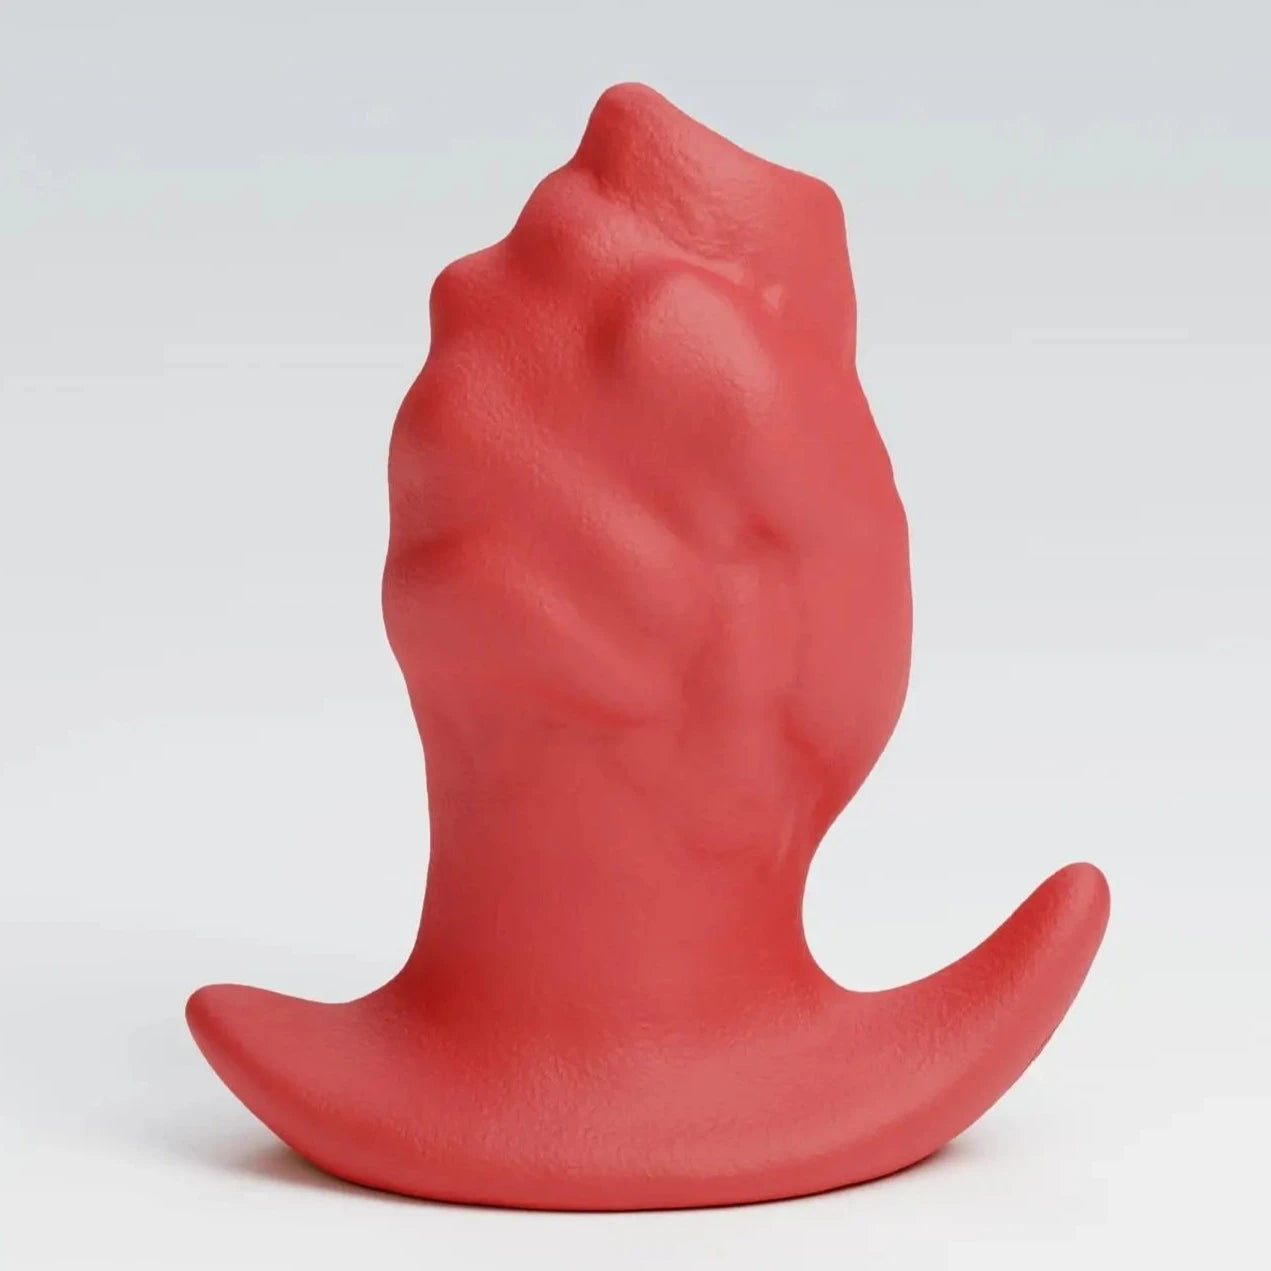 buttplug for fisting,punch anal plug,hollow butt plug red color